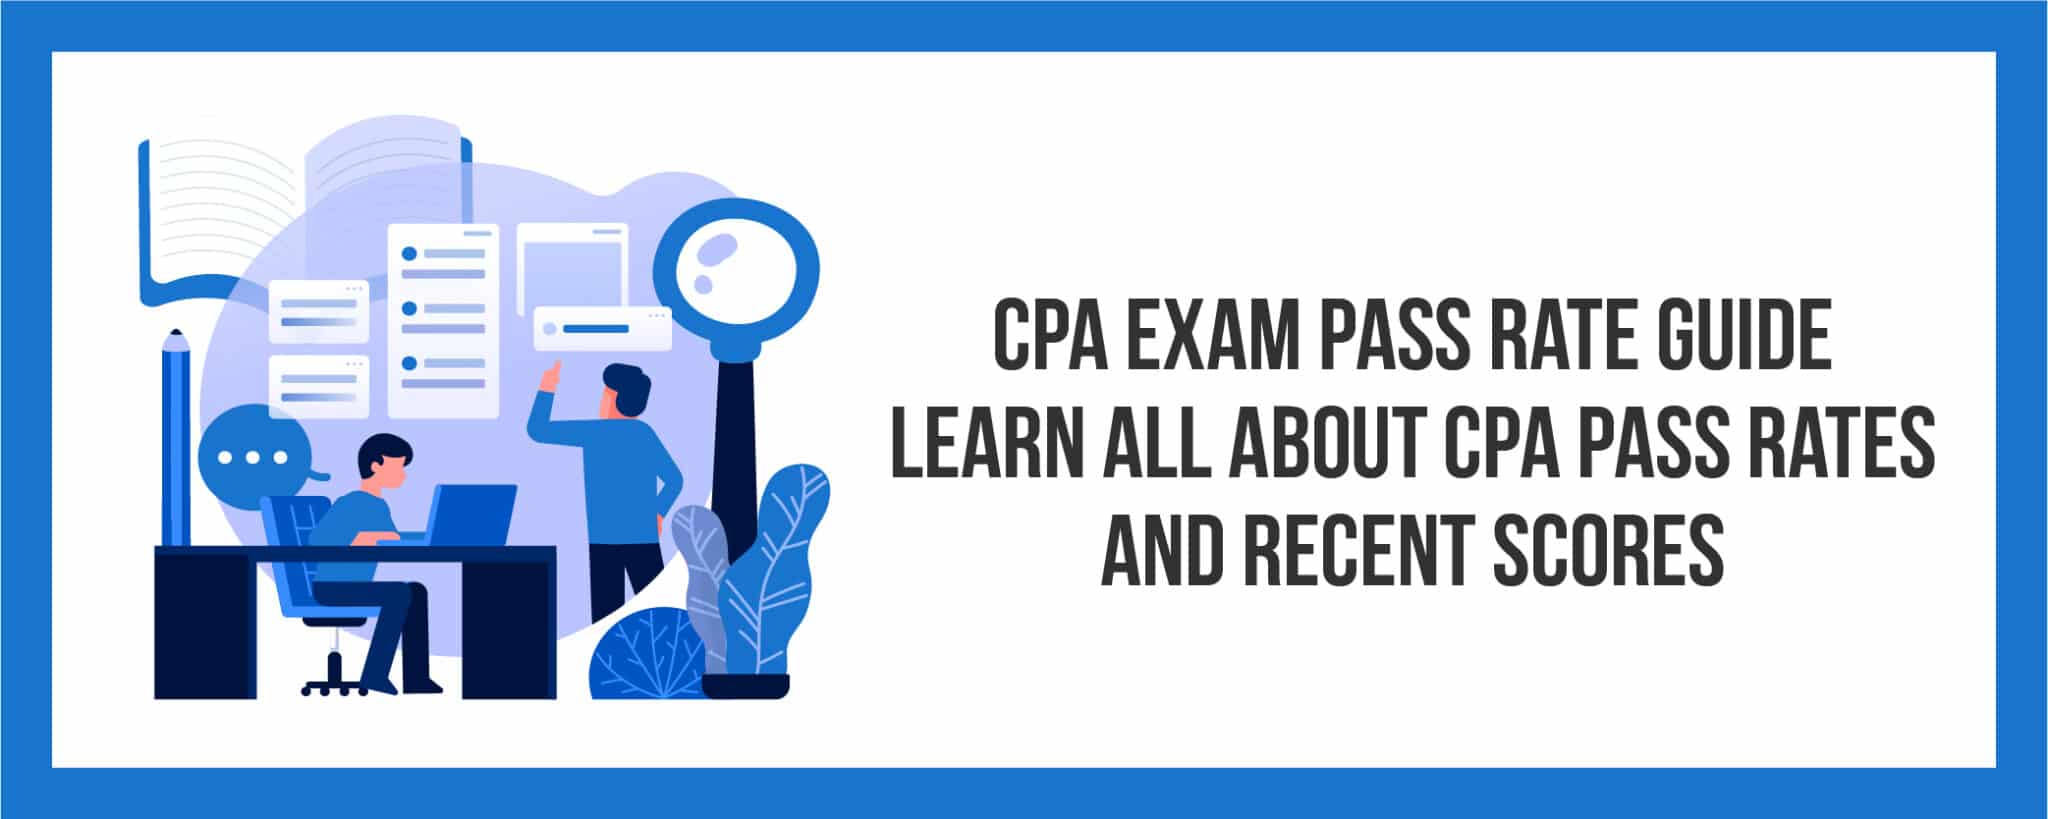 CPA Exam Pass Rate All About CPA Pass Rates & Scores